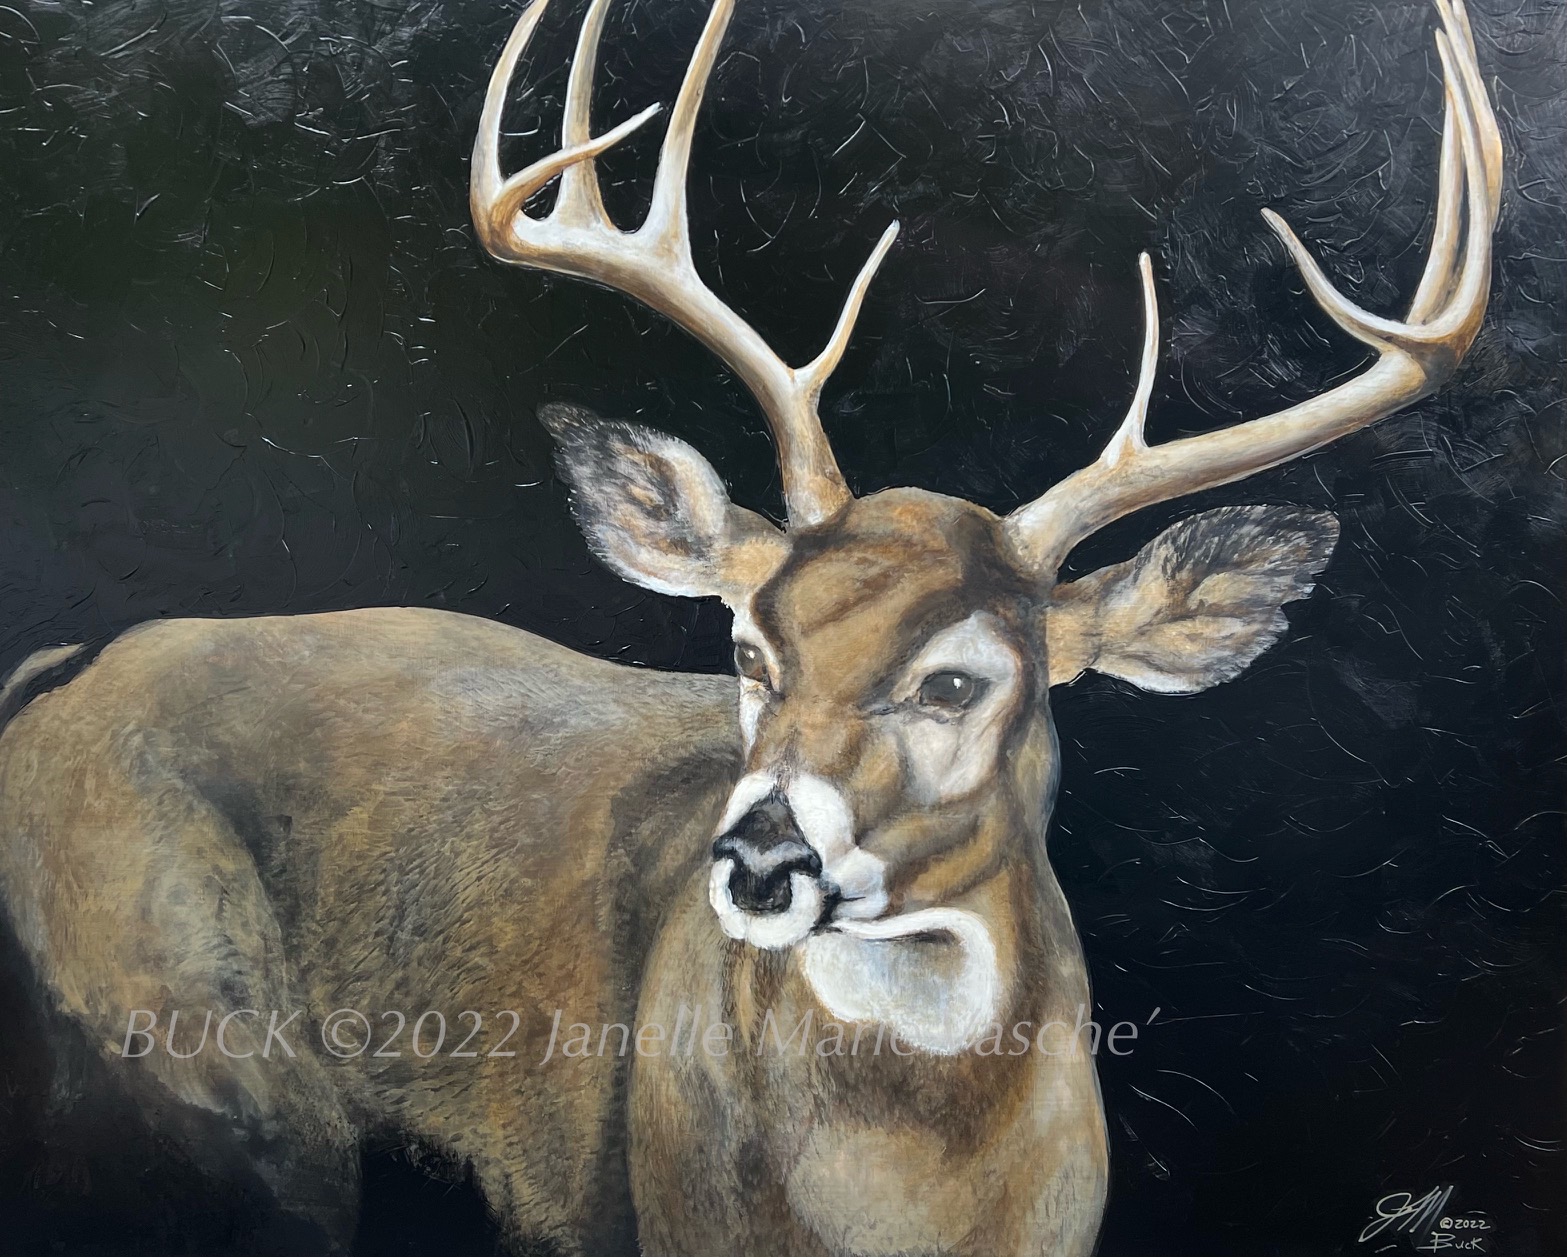 Buck by Janelle Marie

Size: 48 x 60

From Janelle Marie,

A Native of the Southwest, I found a home in the Sierras nearly 17 years ago. I am a freelance artist for 31 years now painting a broad spectrum of subjects from landscape portraiture(both human and animal), sports, abstract, to outdoor paintings on plywood. A good portion of my abstract work can be seen in Bay Area businesses and homes as well as on the Big Island of Hawaii and throughout the United States. I often work with interior designers and collectors to create custom concepts and very much enjoy the one on one exclusivity of private commissions. I produce originals only and specialize in creating one of a kind paintings for high end mountain homes as well as desert retreats and healing centers. Currently available in the Tahoe area is a wide variety of Horse paintings, Bears, Buffalo, Cattle and Cowgirls.

To view in person please visit the Truckee gallery on River Street, and the showroom on Pioneer Trail, and ask for Ann Dee Zeilinger or Jill Amen at Mountain Living Home Consignment 530-536-5046